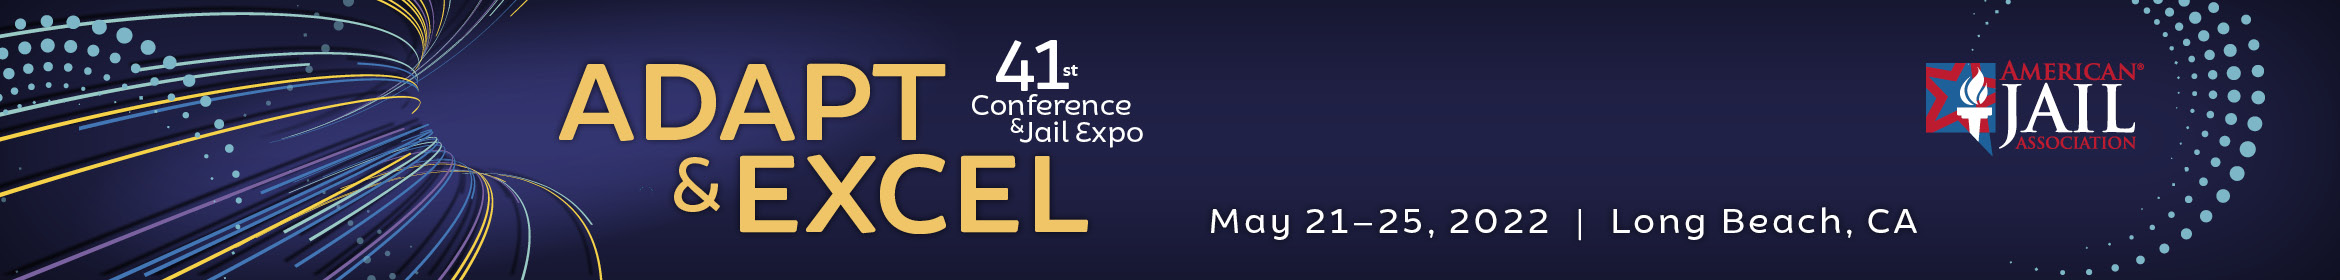 AJA 41st Conference & Jail Expo Main banner